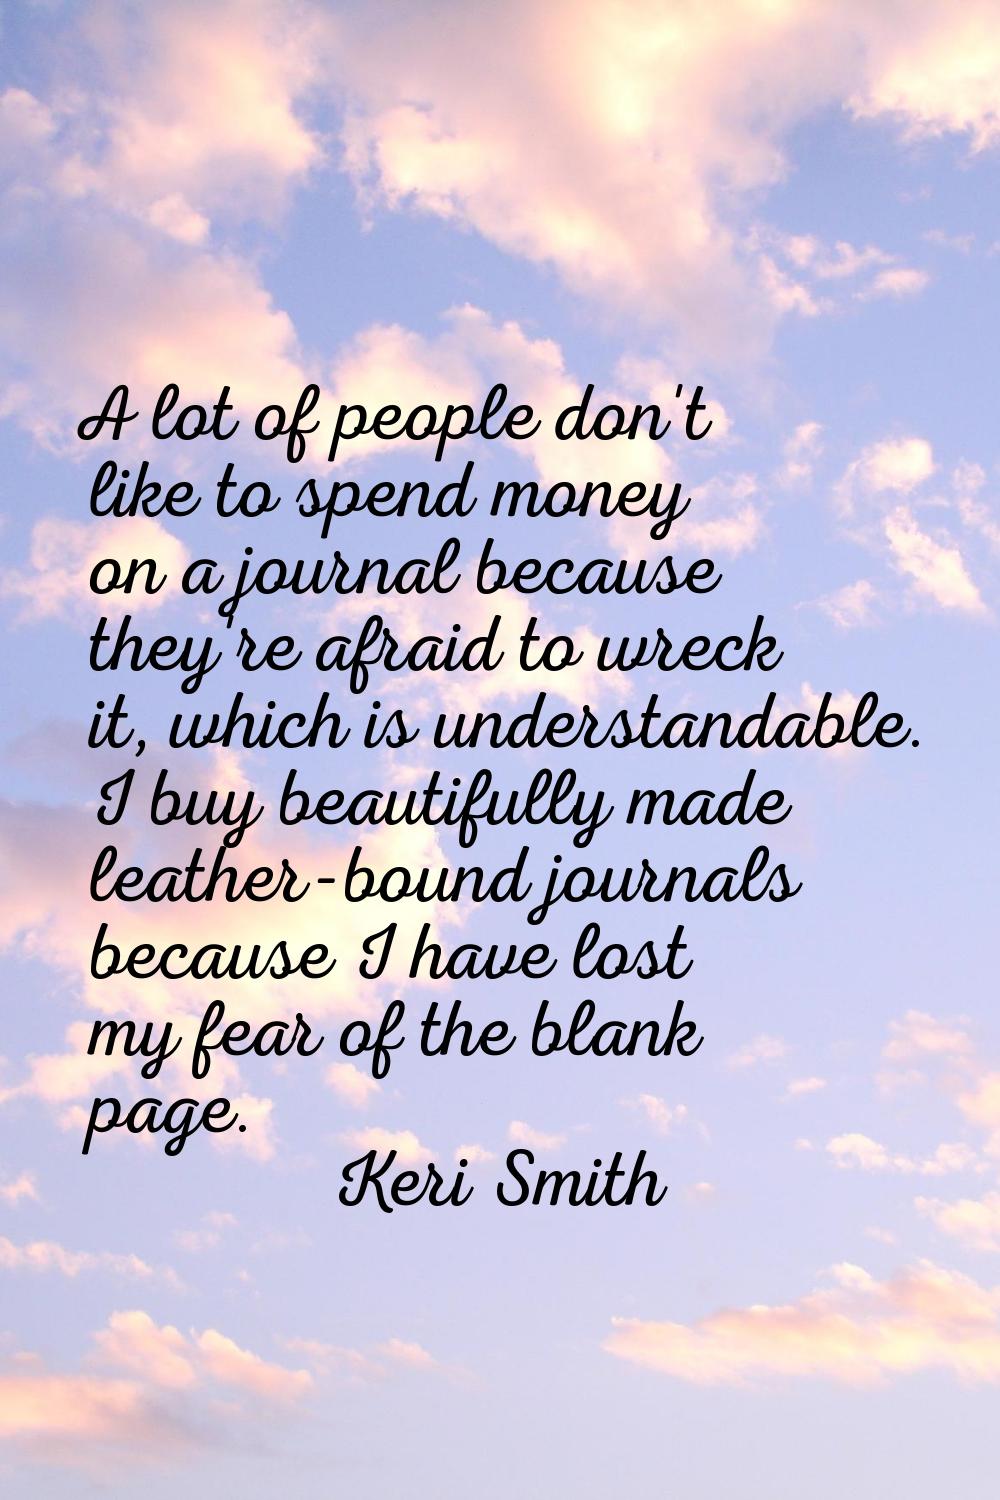 A lot of people don't like to spend money on a journal because they're afraid to wreck it, which is